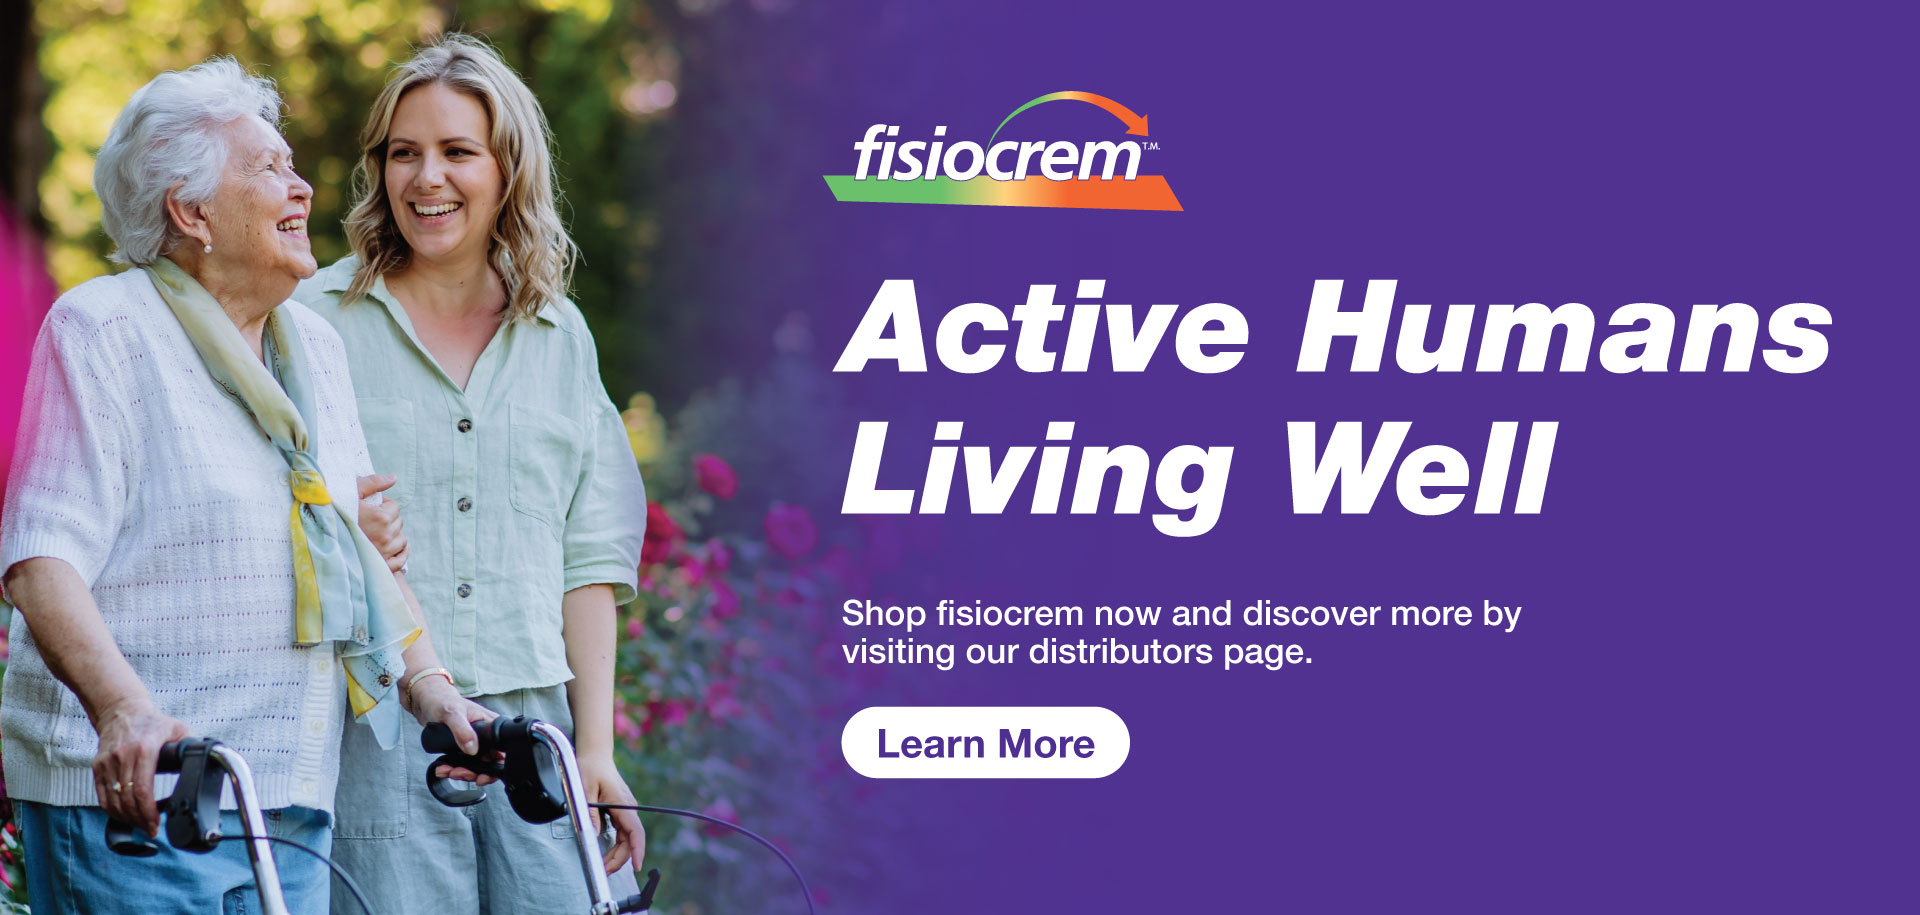 fisiocrem - active humans living well